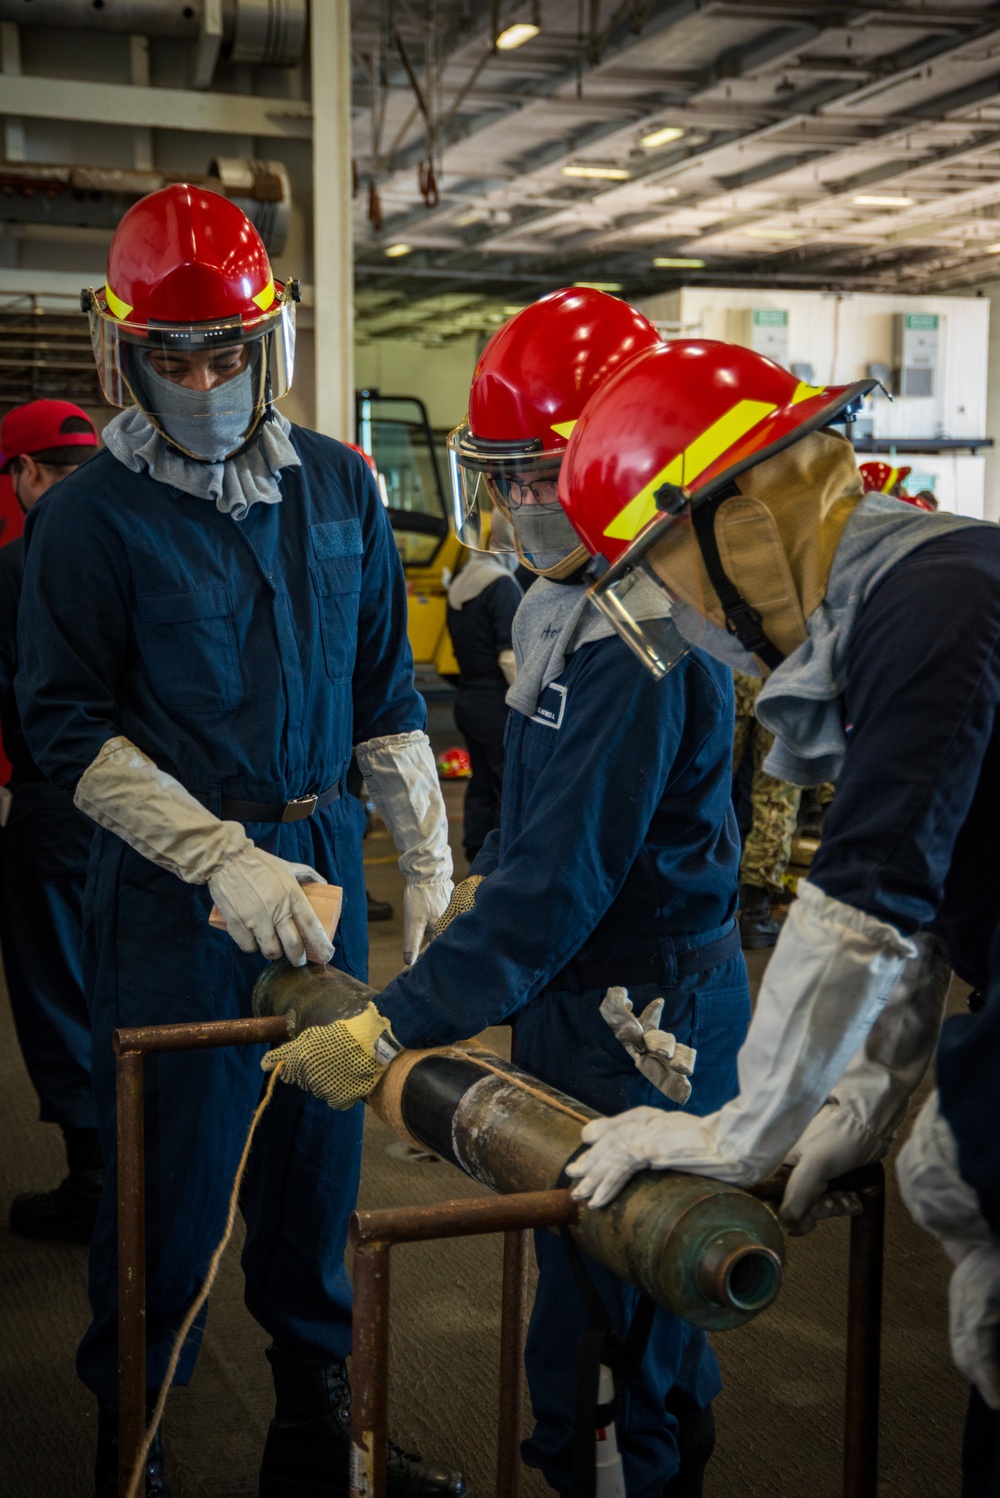 USS Carl Vinson (CVN 70) Sailors Particpate In Pipe Patching Drill